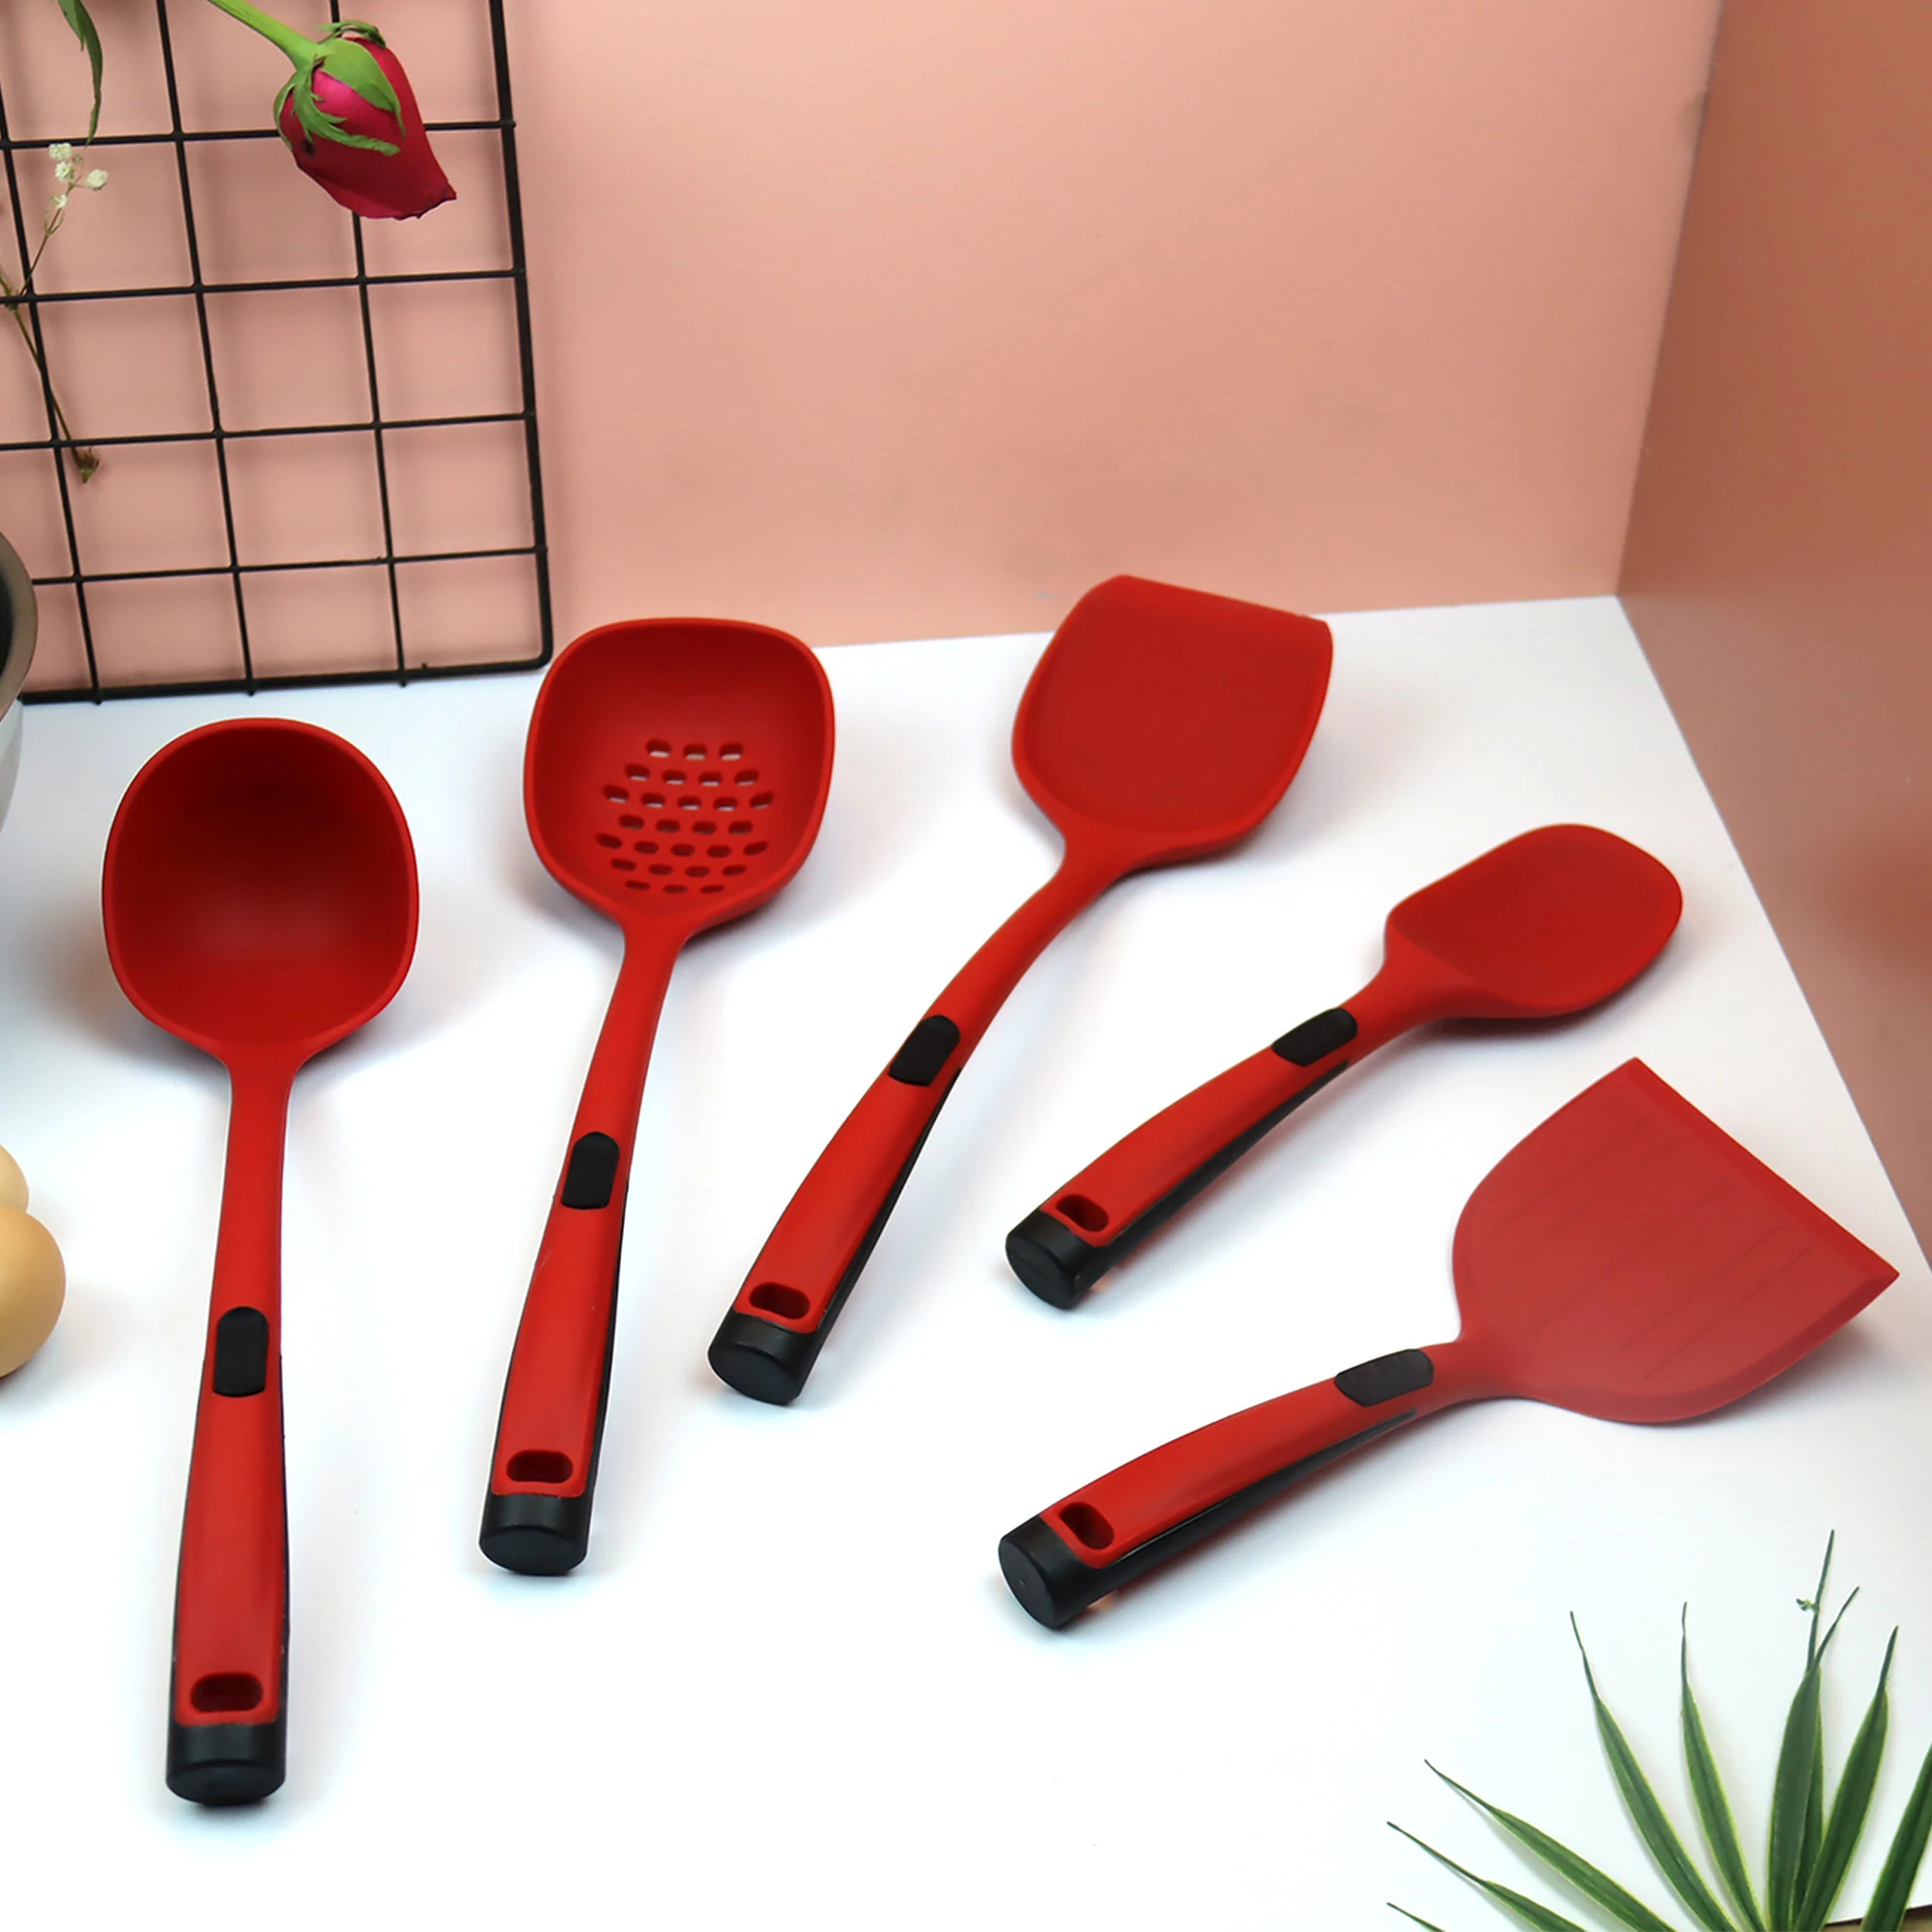 2021 New Style Hot Sale Silicone Cooking Utensils Kitchen Tools Food Grade Long Silicone Baking Spatula